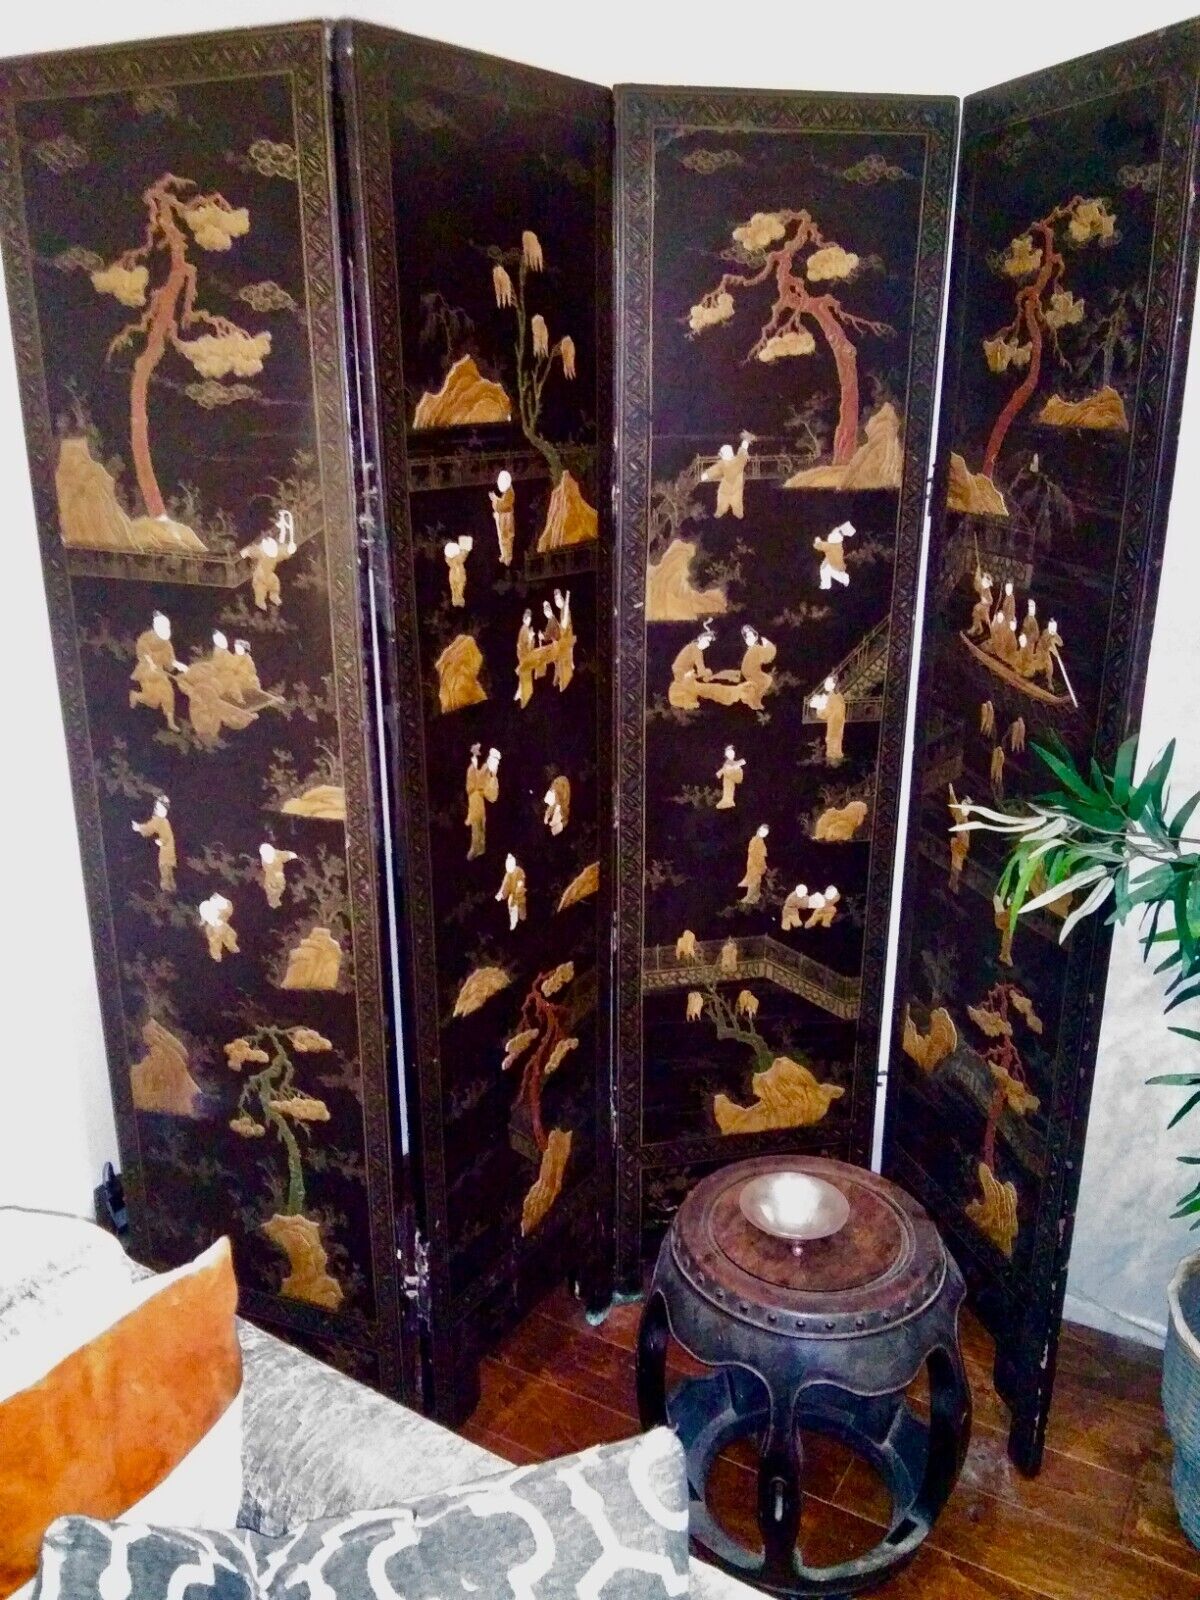 ANTIQUE CHINESE BLACK LACQUER SCREEN Mother of Pearl-EXQUISITE! RARE19th C. Без бренда - фотография #8